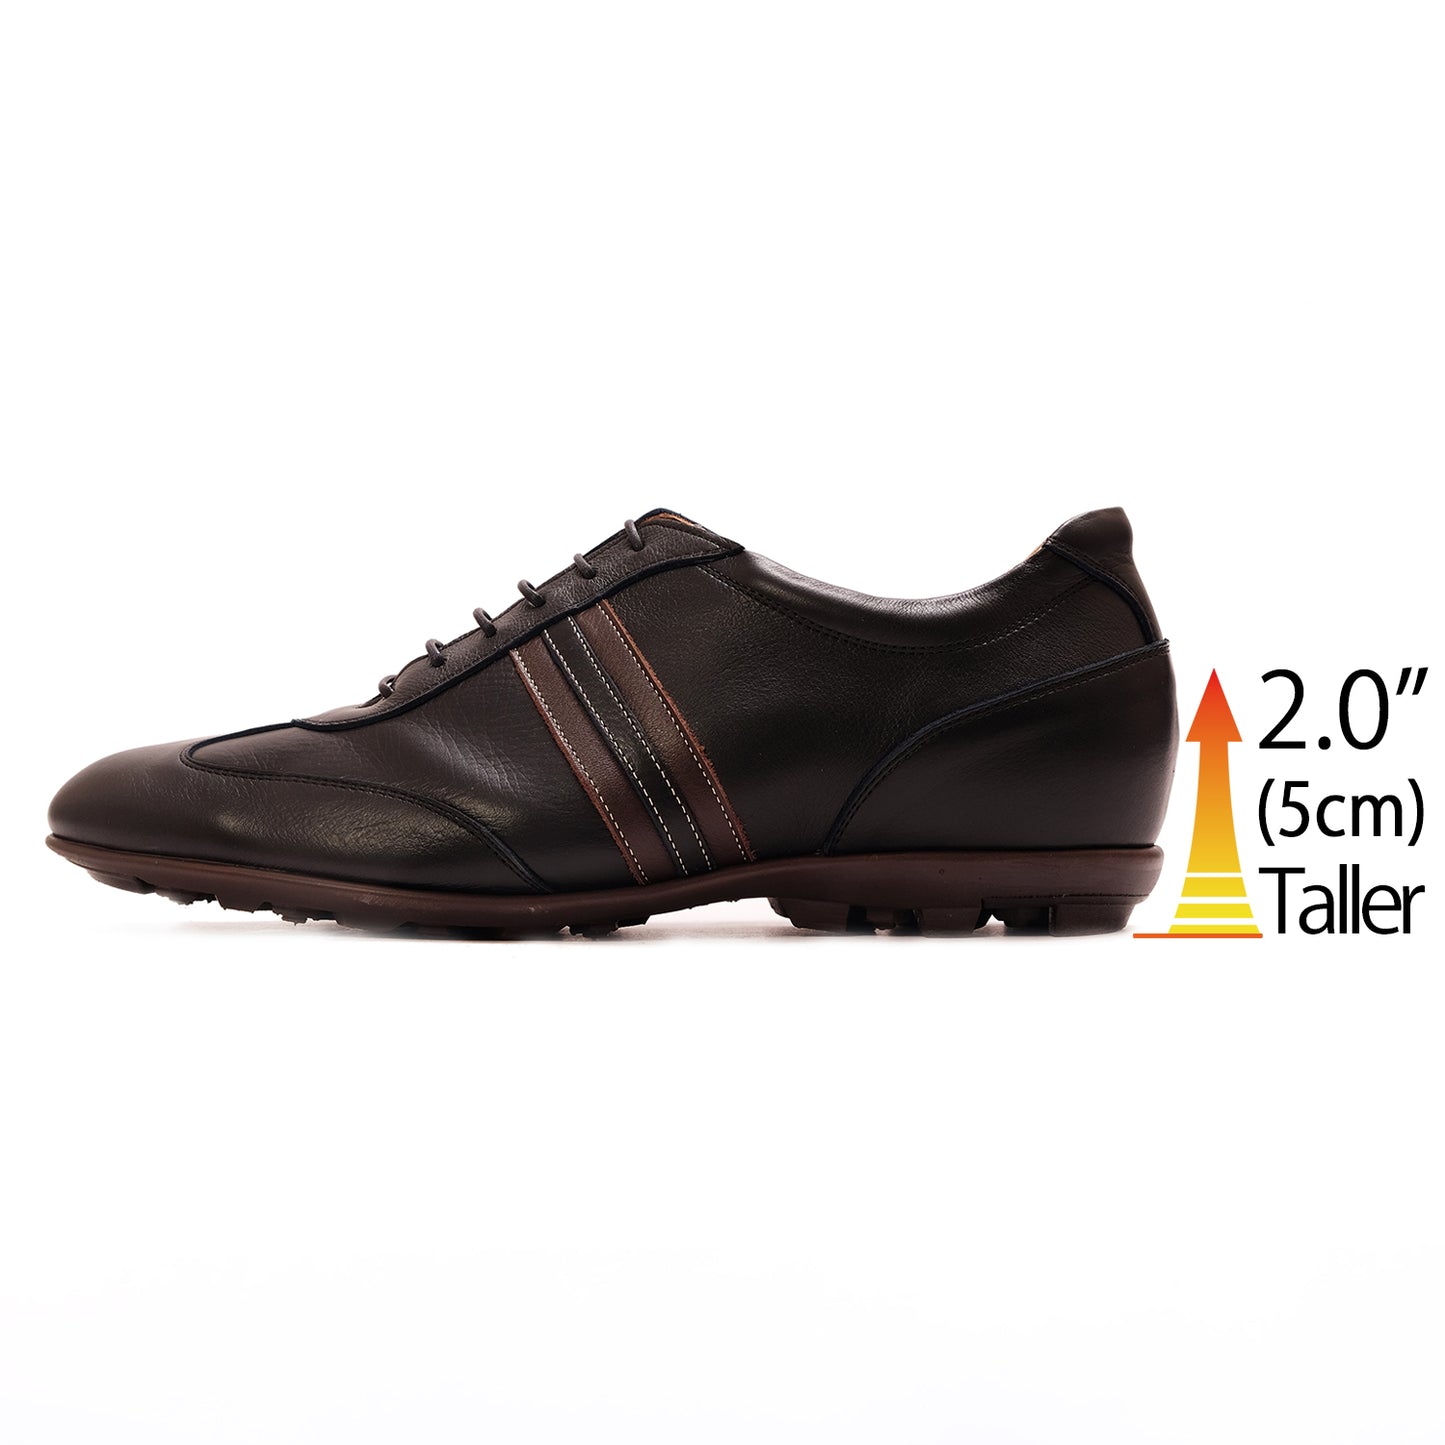 Men's Elevator Shoes Height Increasing 2" Taller Business Casual Shoes Genuine Leather Fashion Sneaker No. 899